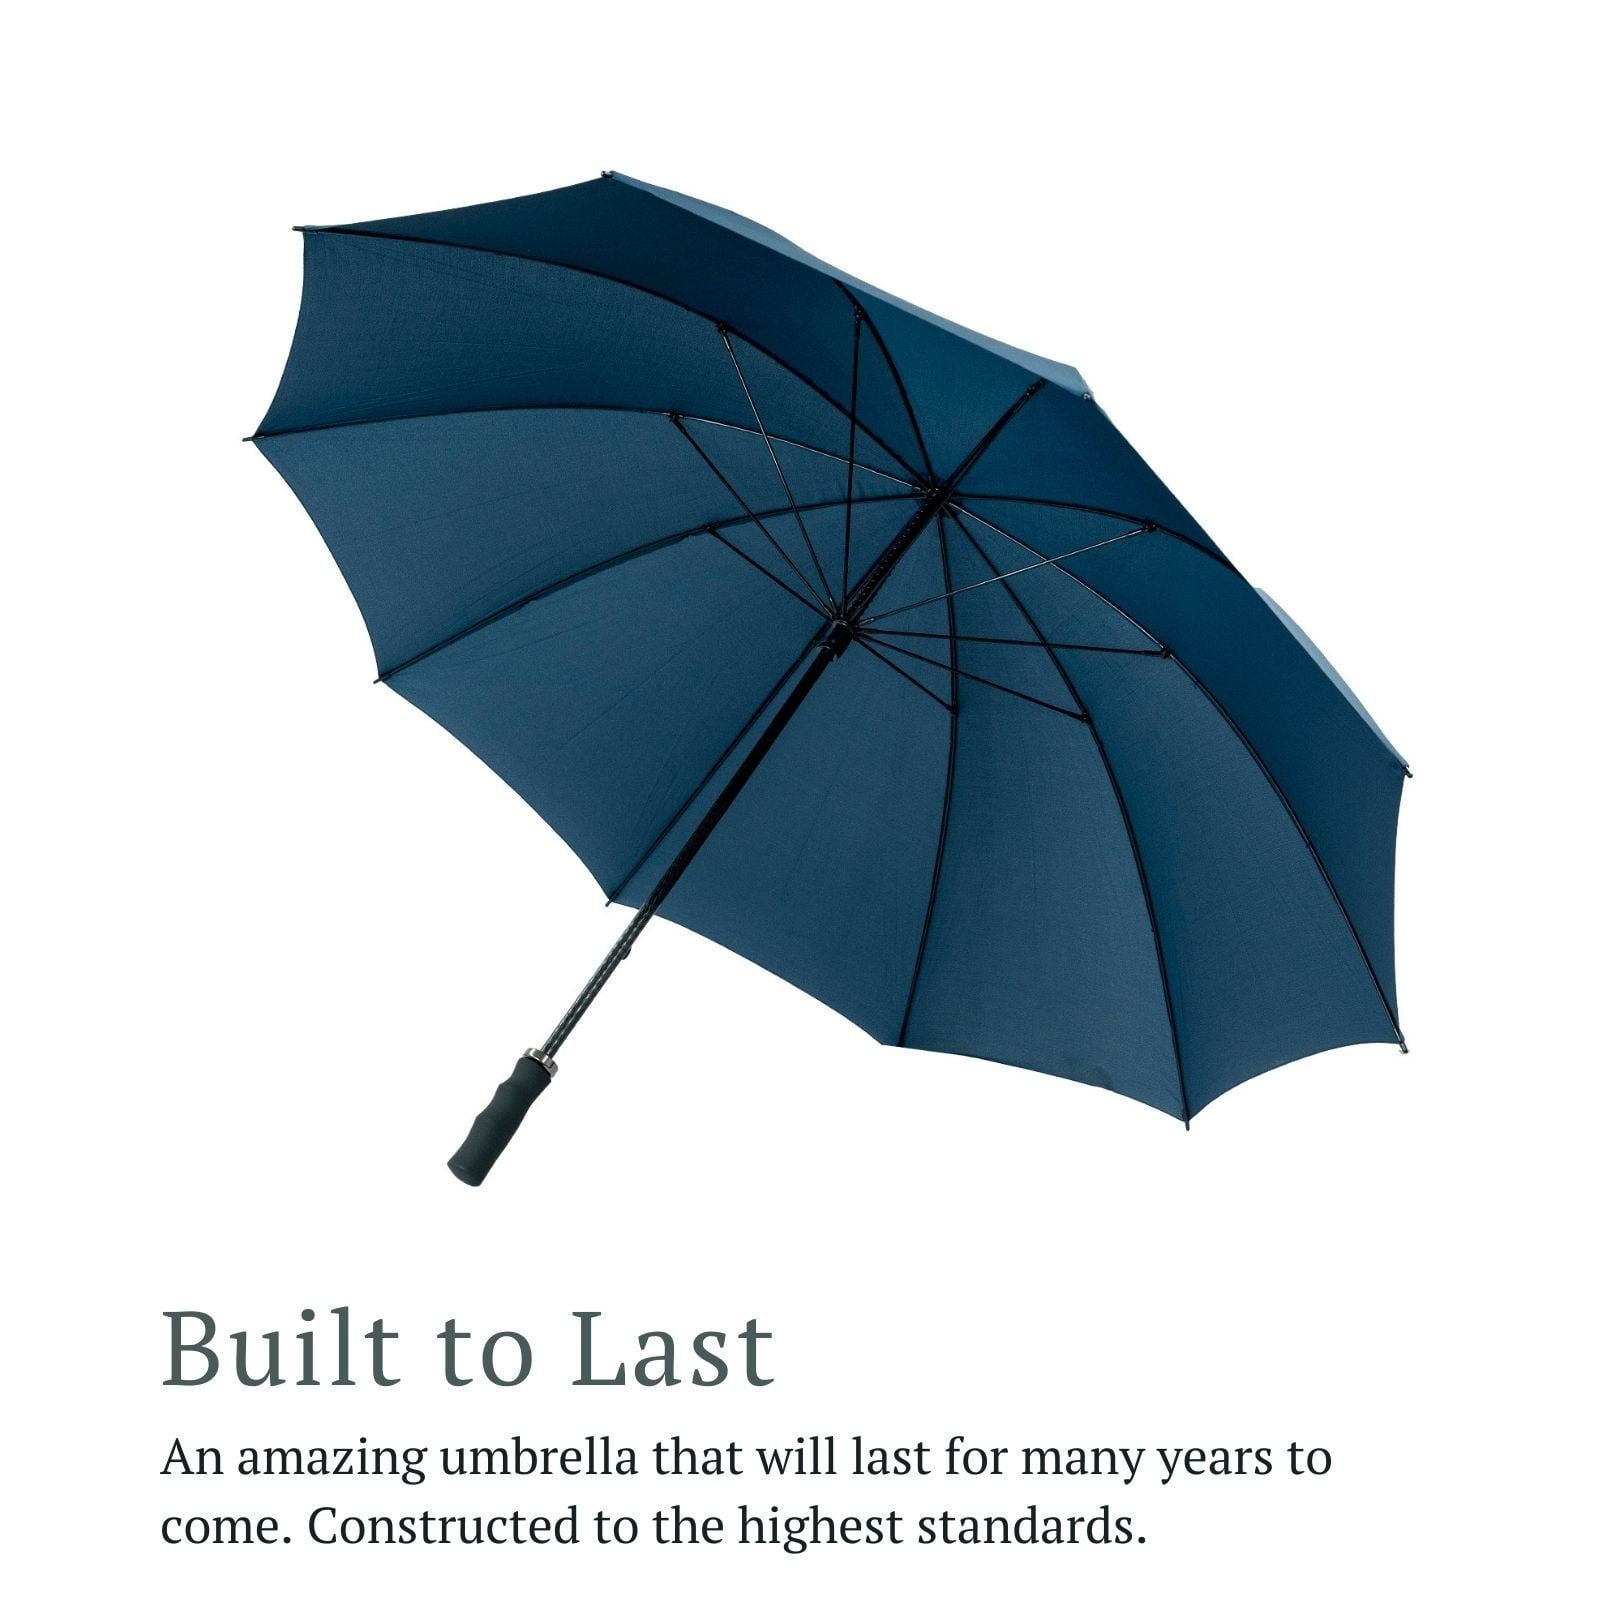 StormStar Windproof Navy Golf Umbrella infographic about the quality